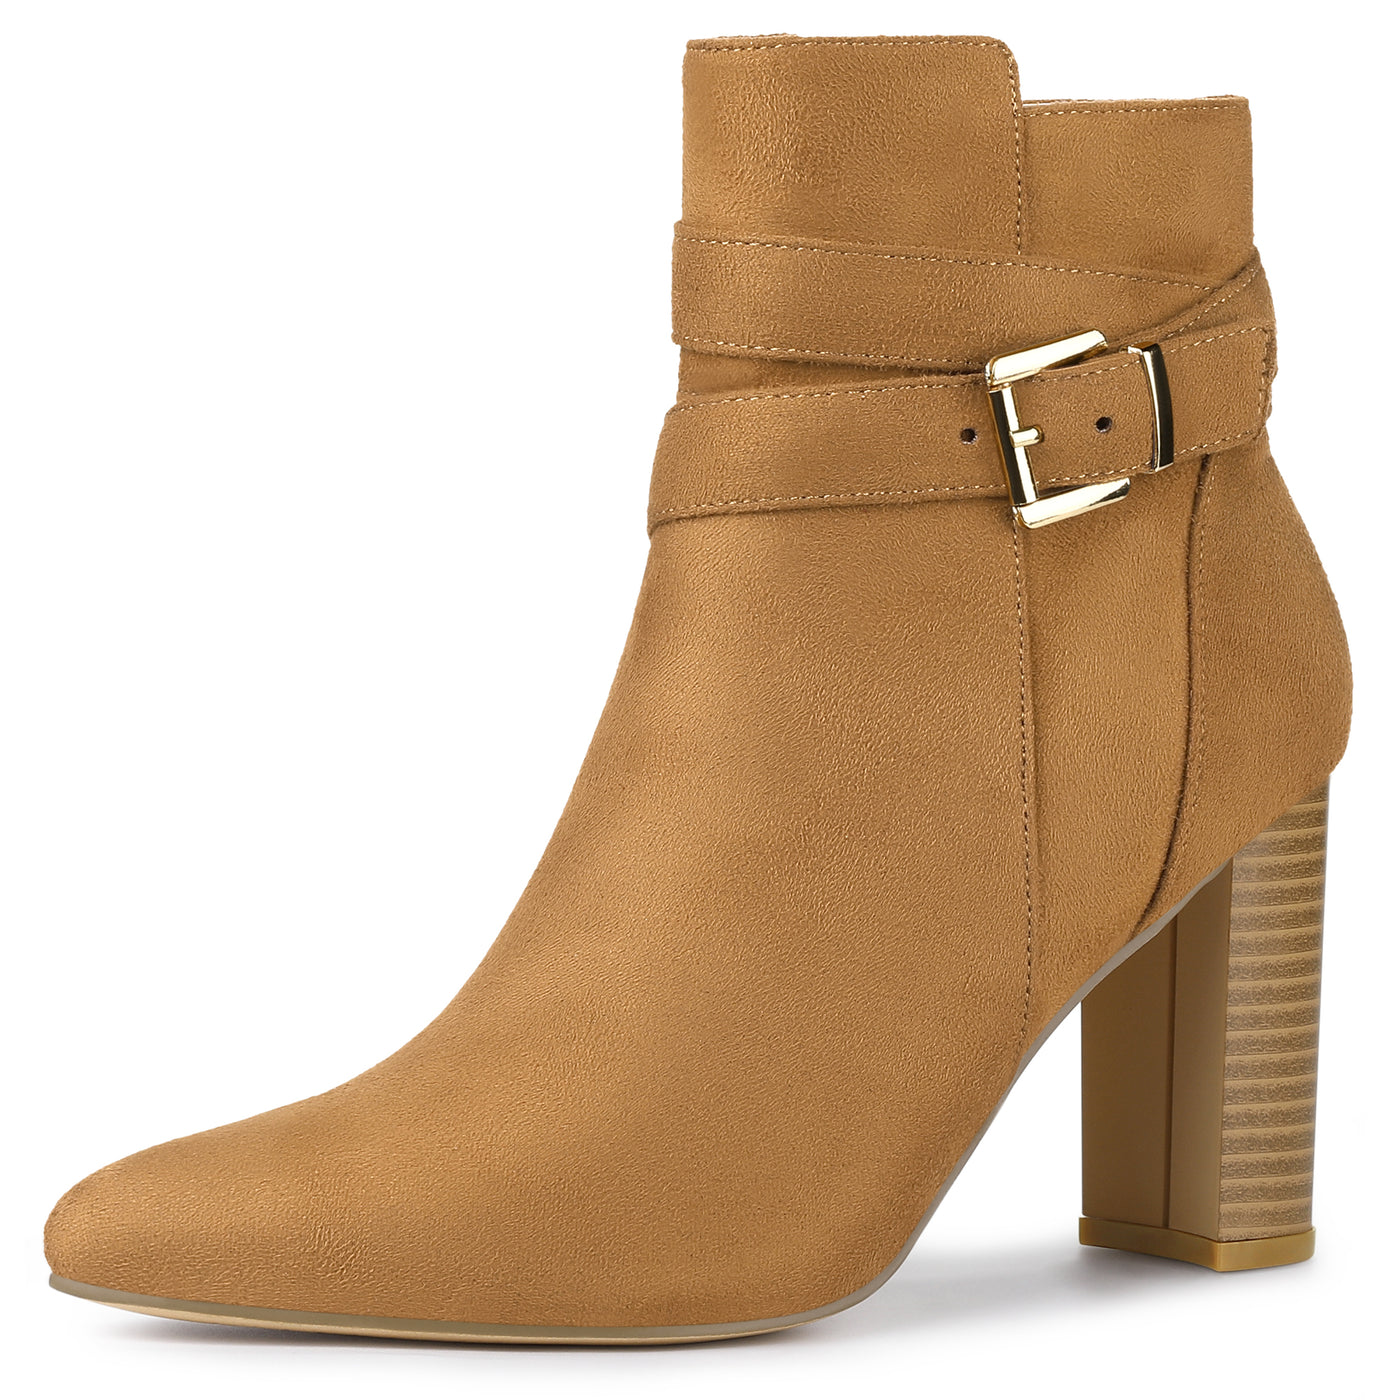 Allegra K Pointed Toe Buckle Decor Chunky Heel Ankle Boots